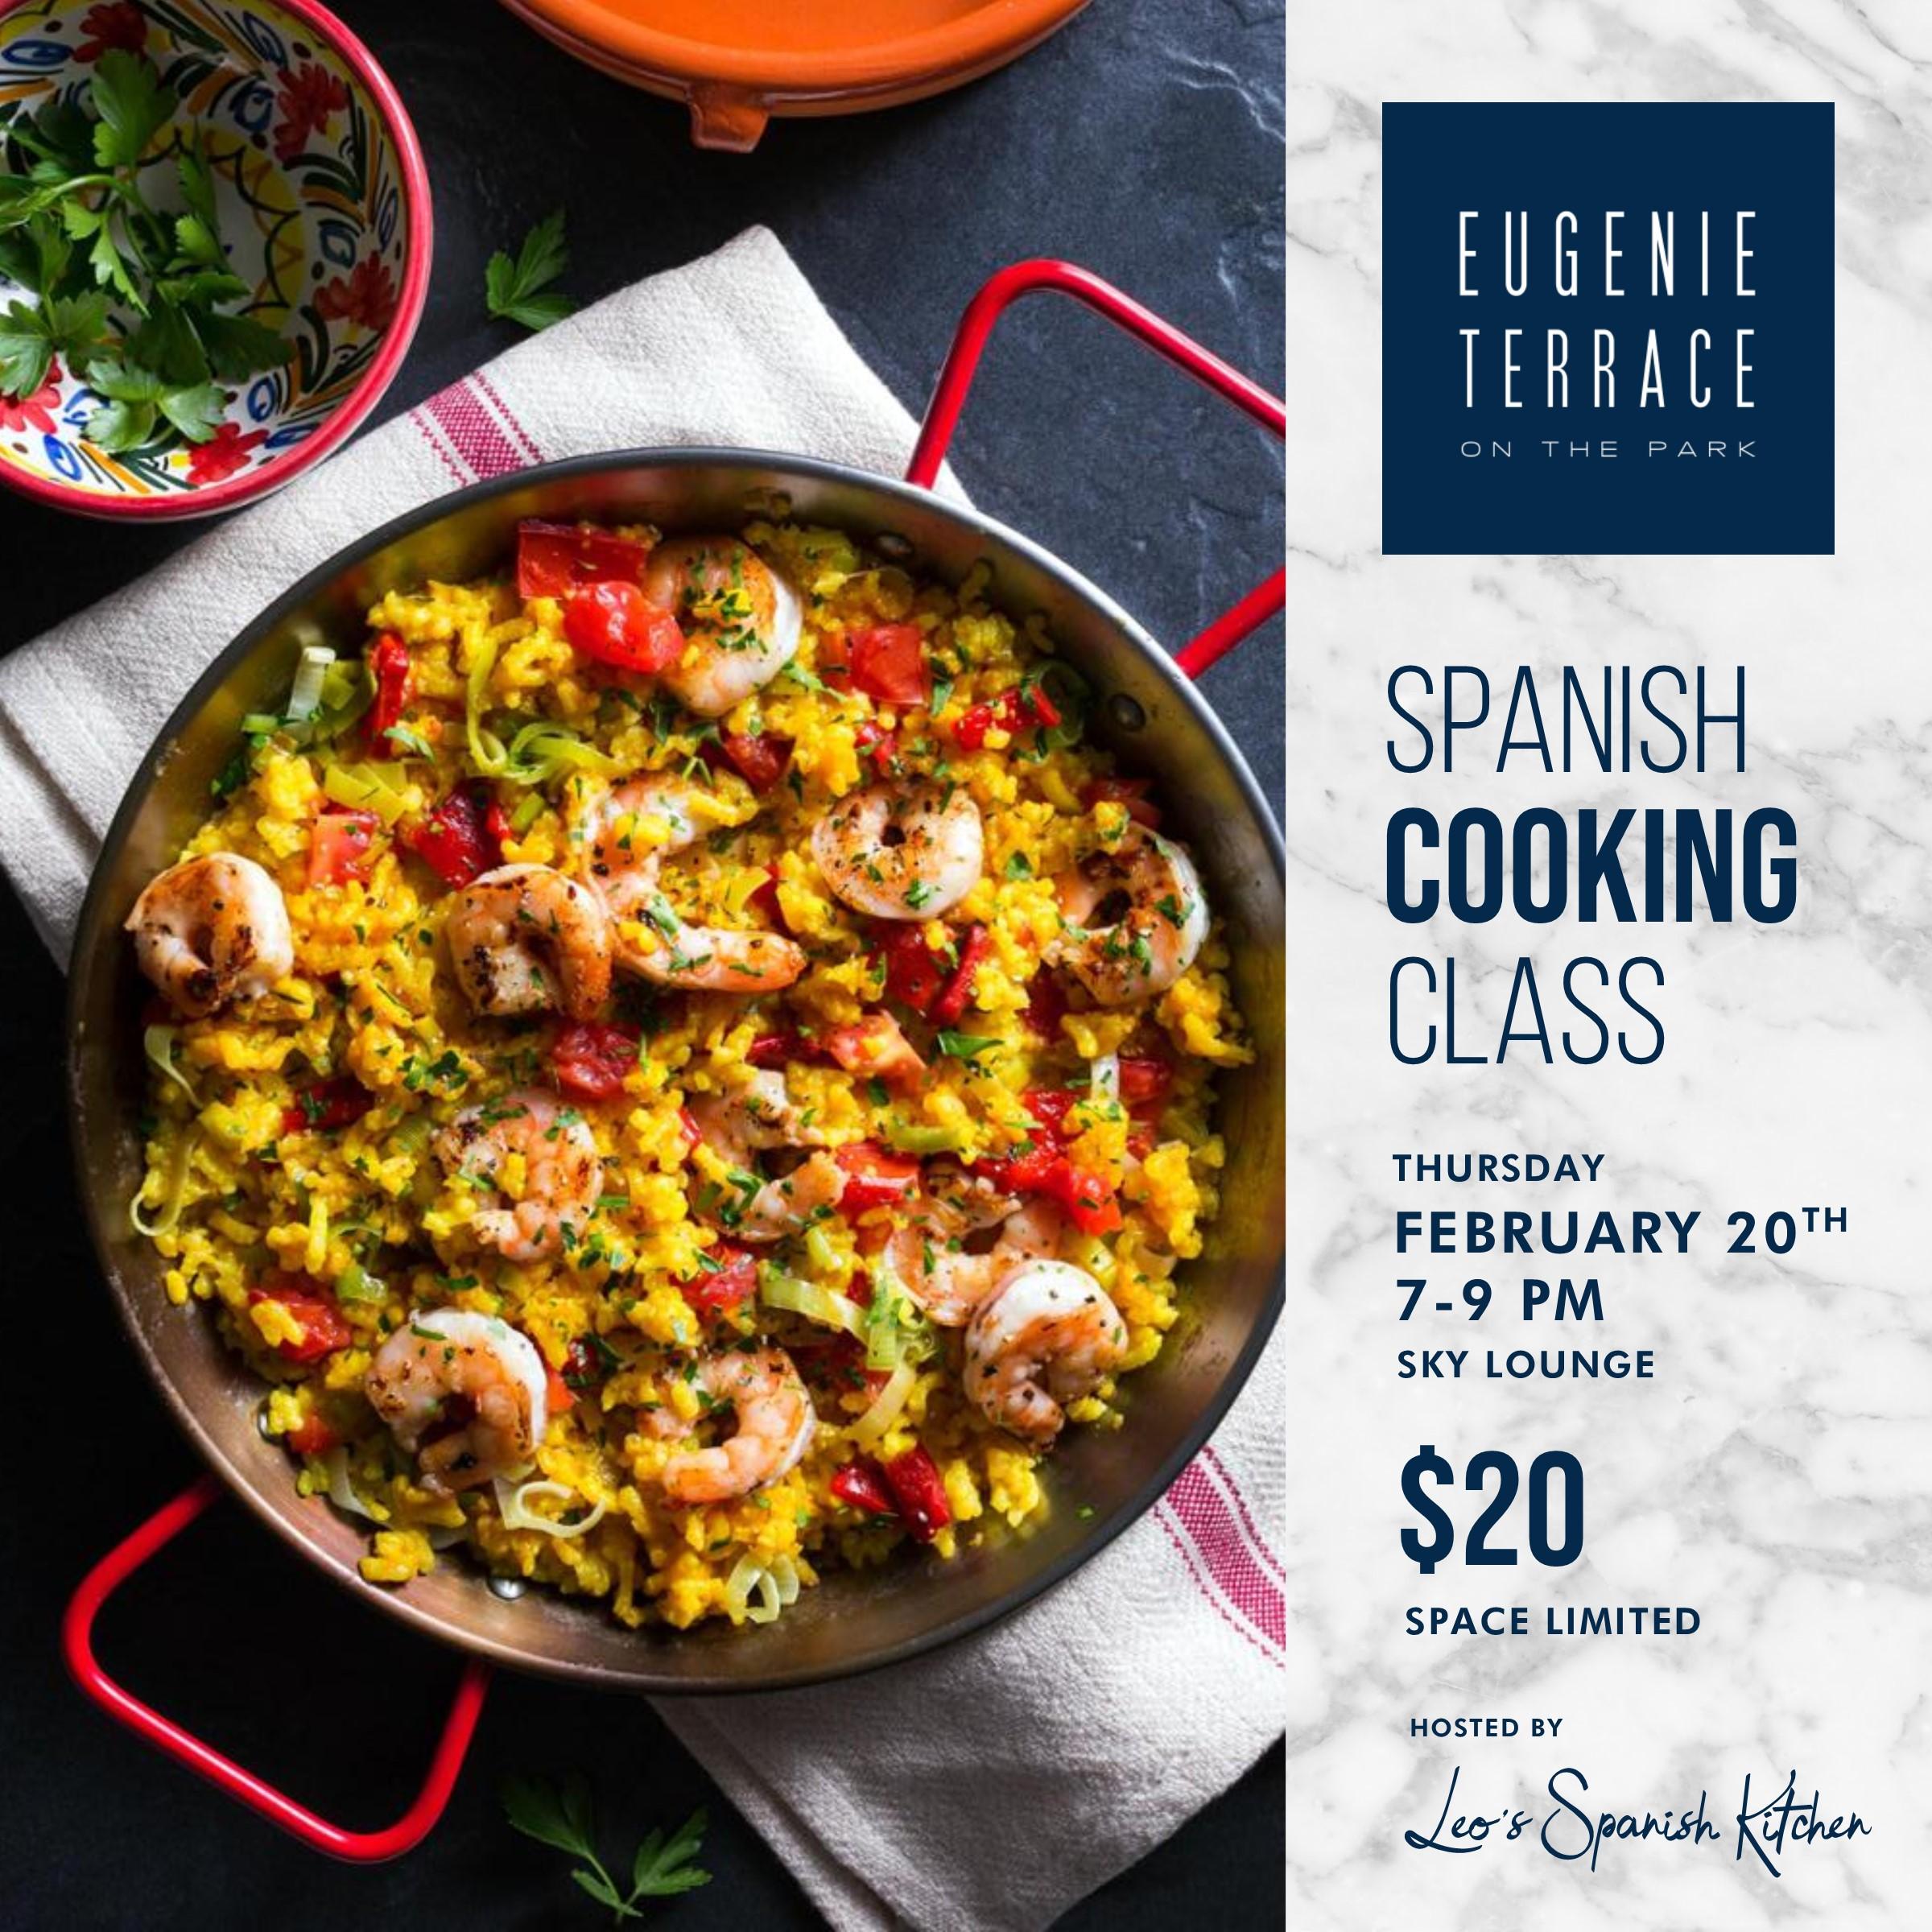 SPANISH COOKING CLASS